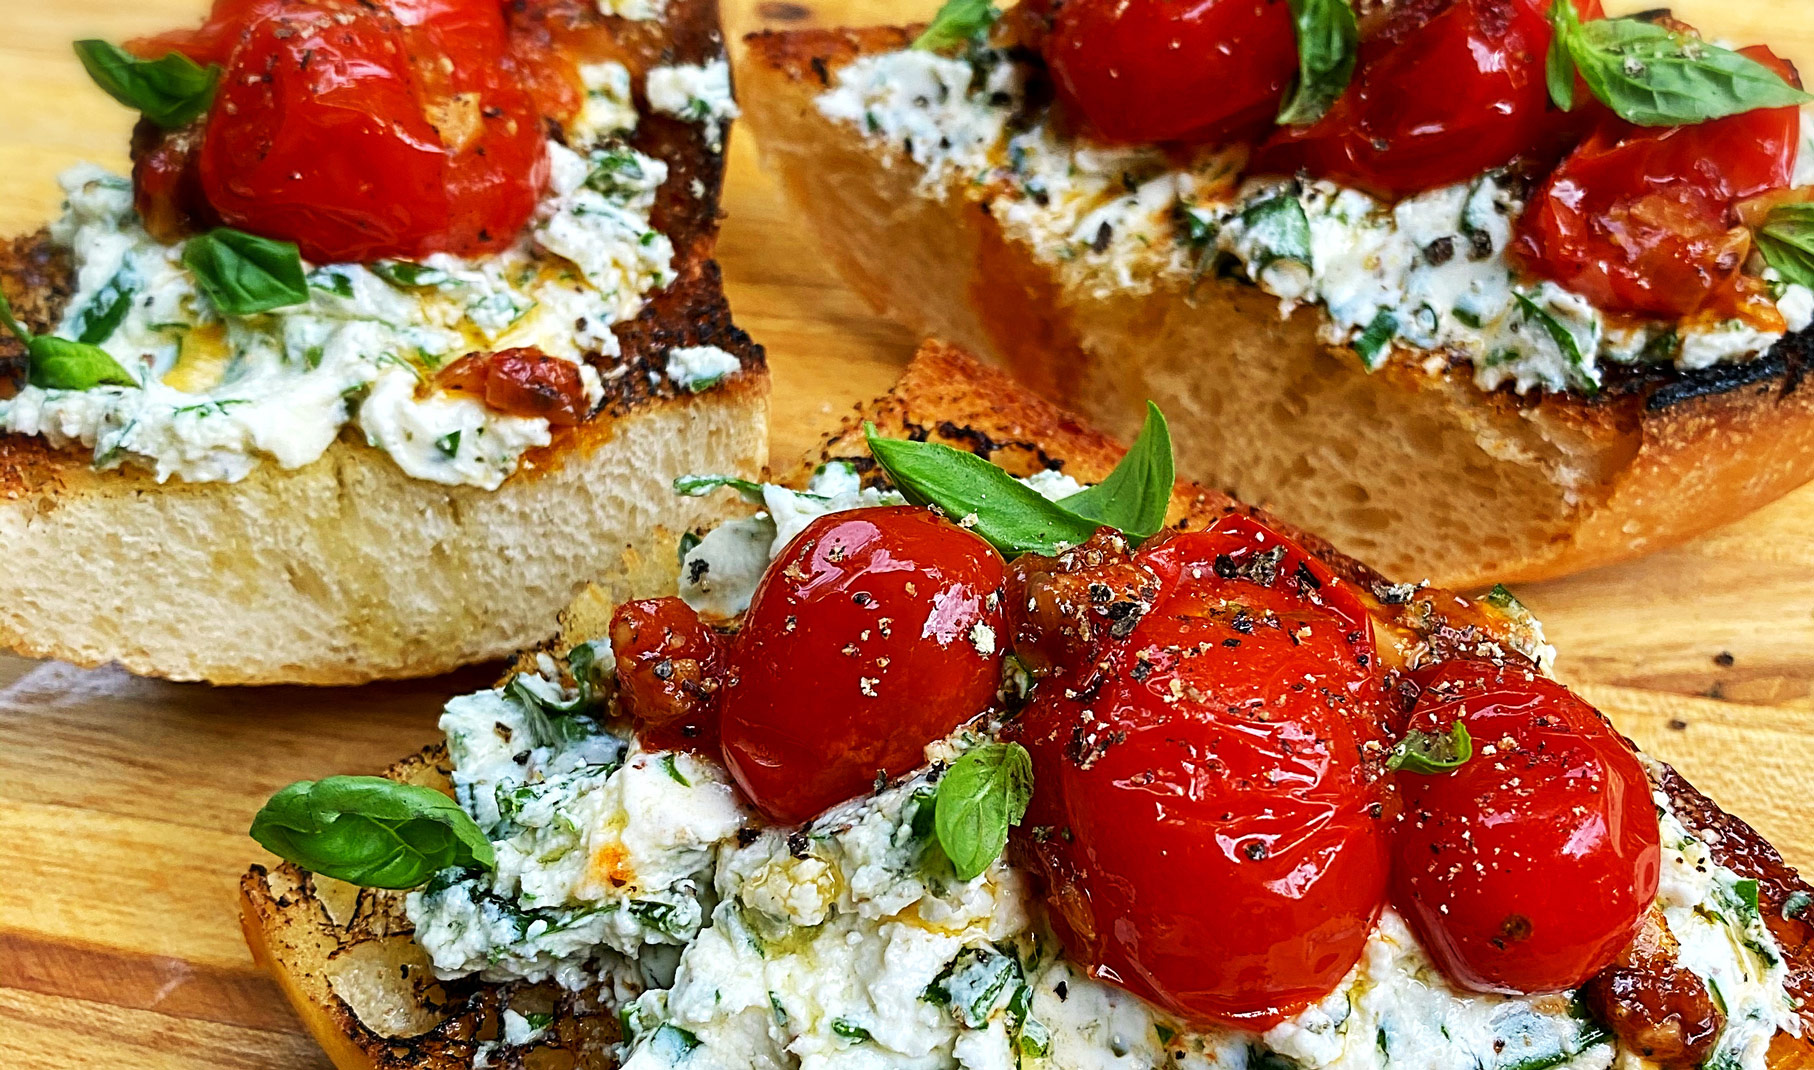 Garlic and Herb Goat Cheese Toasts with Blistered Tomatoes